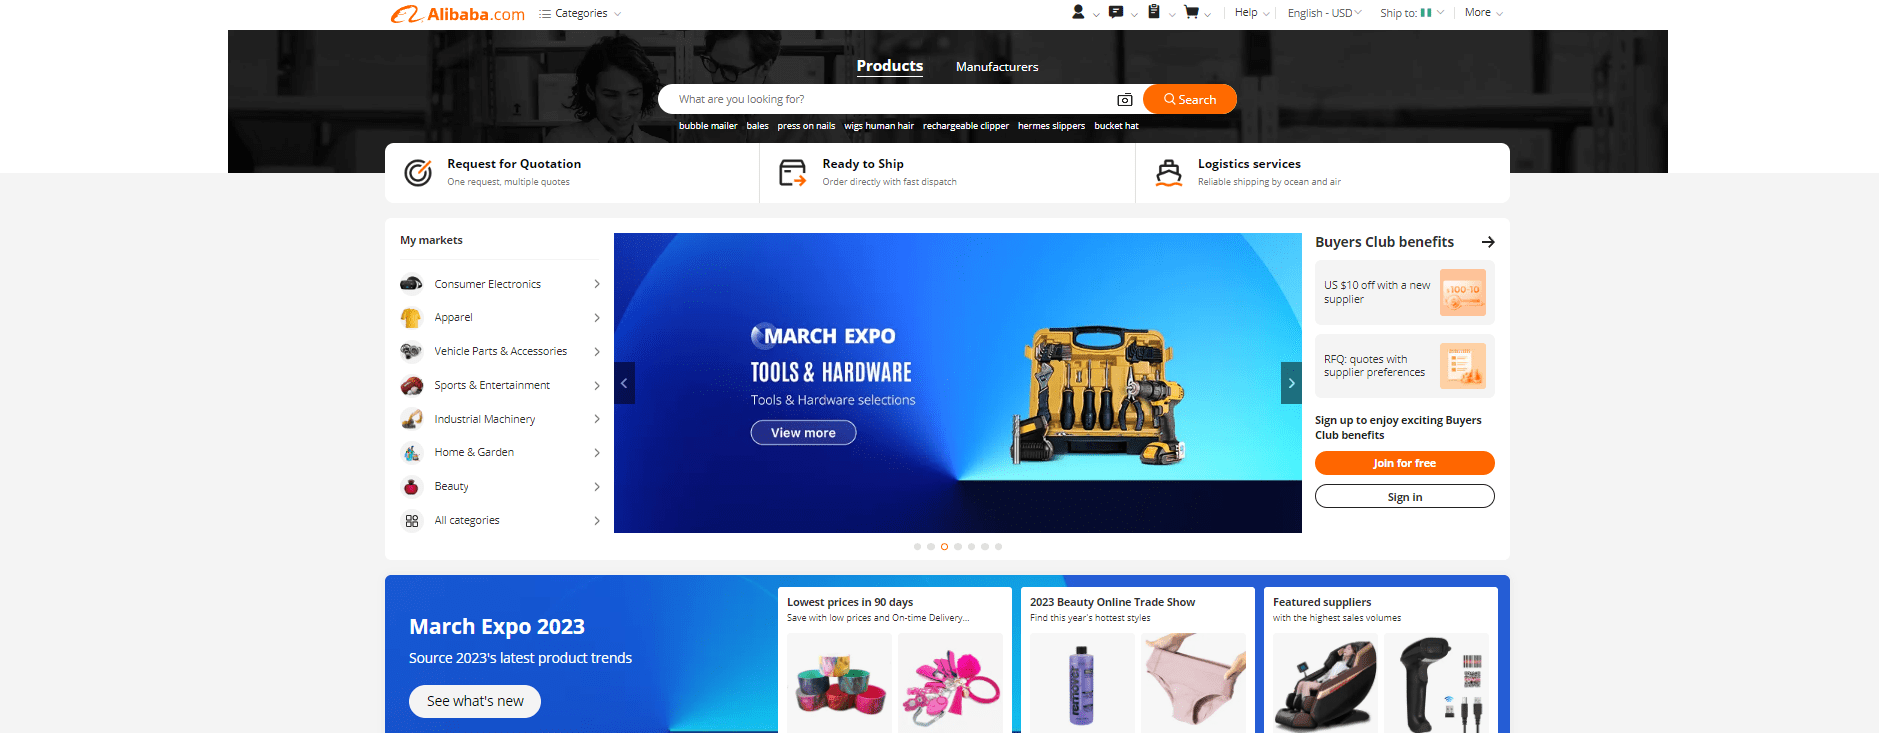 Alibaba Dropshipping-Lieferant